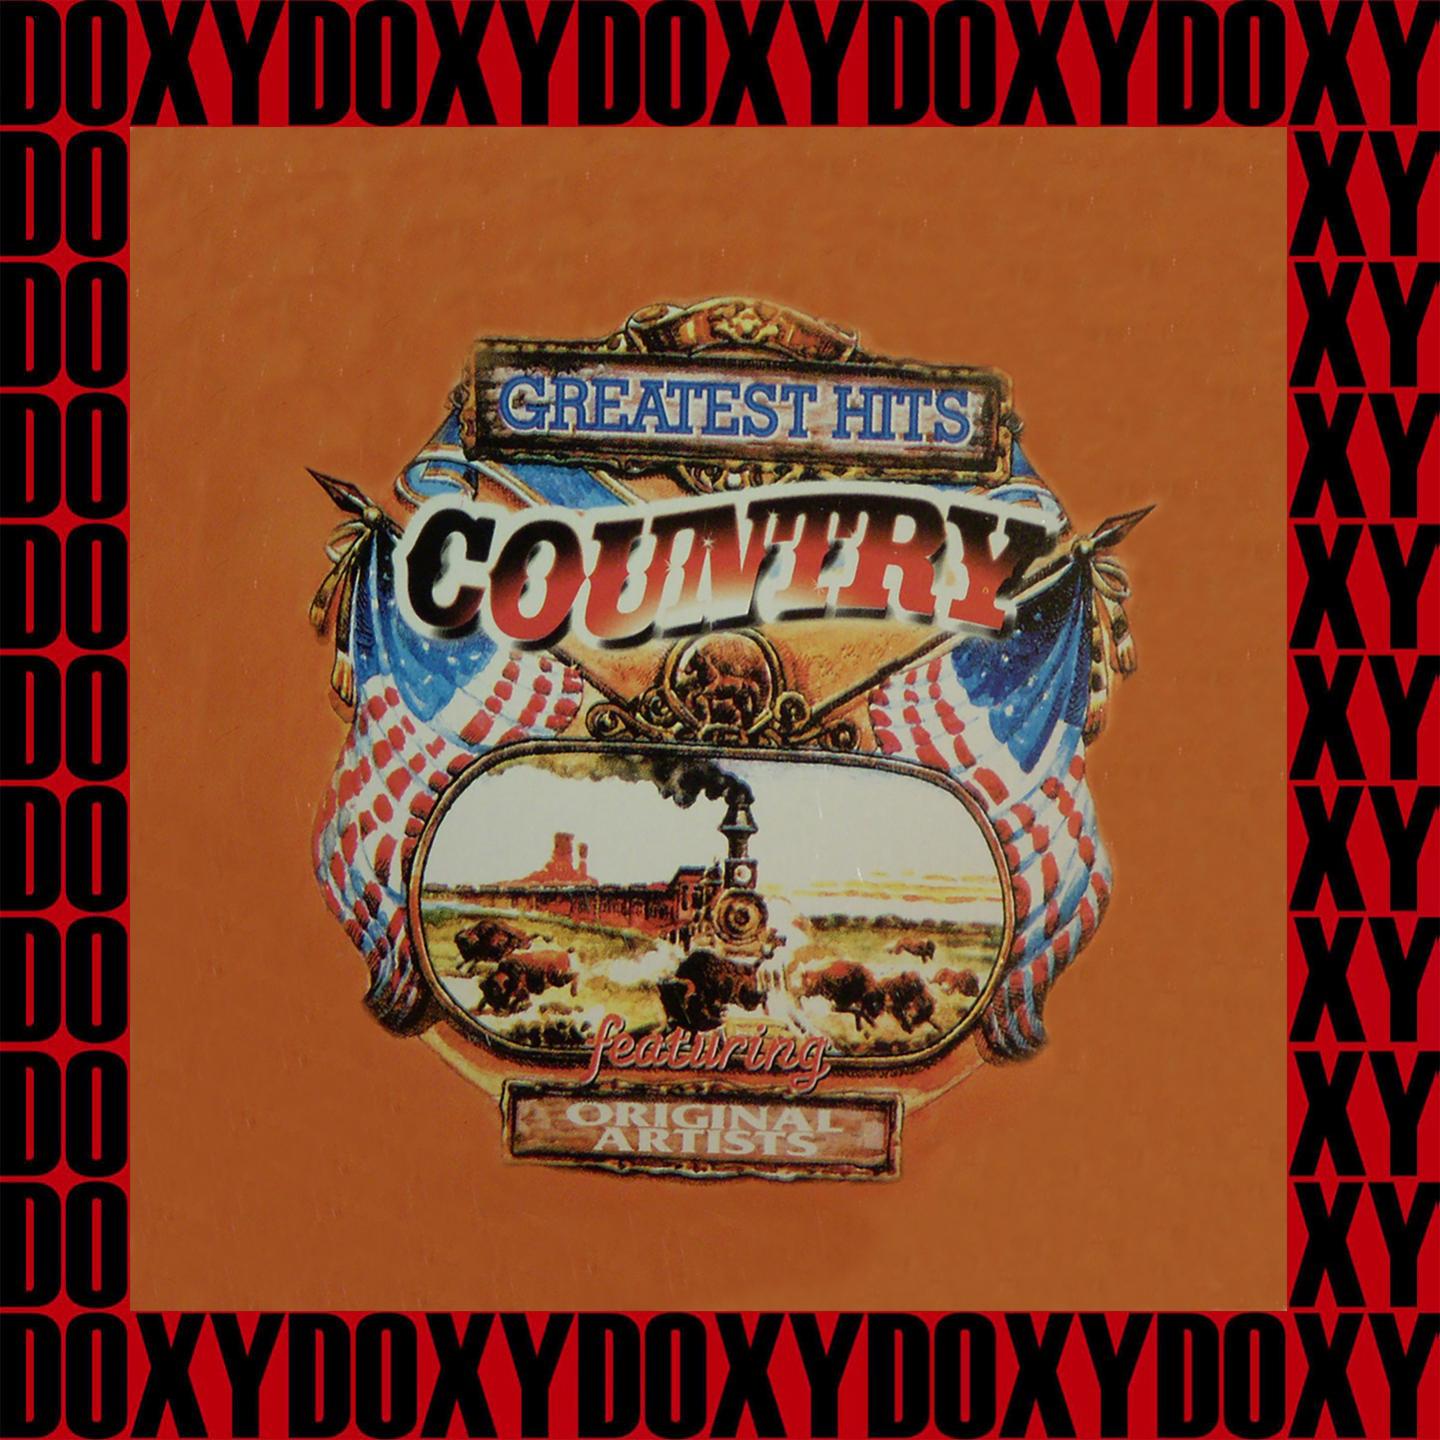 Country's Greatest Hits (Hd Remastered Edition, Doxy Collection)